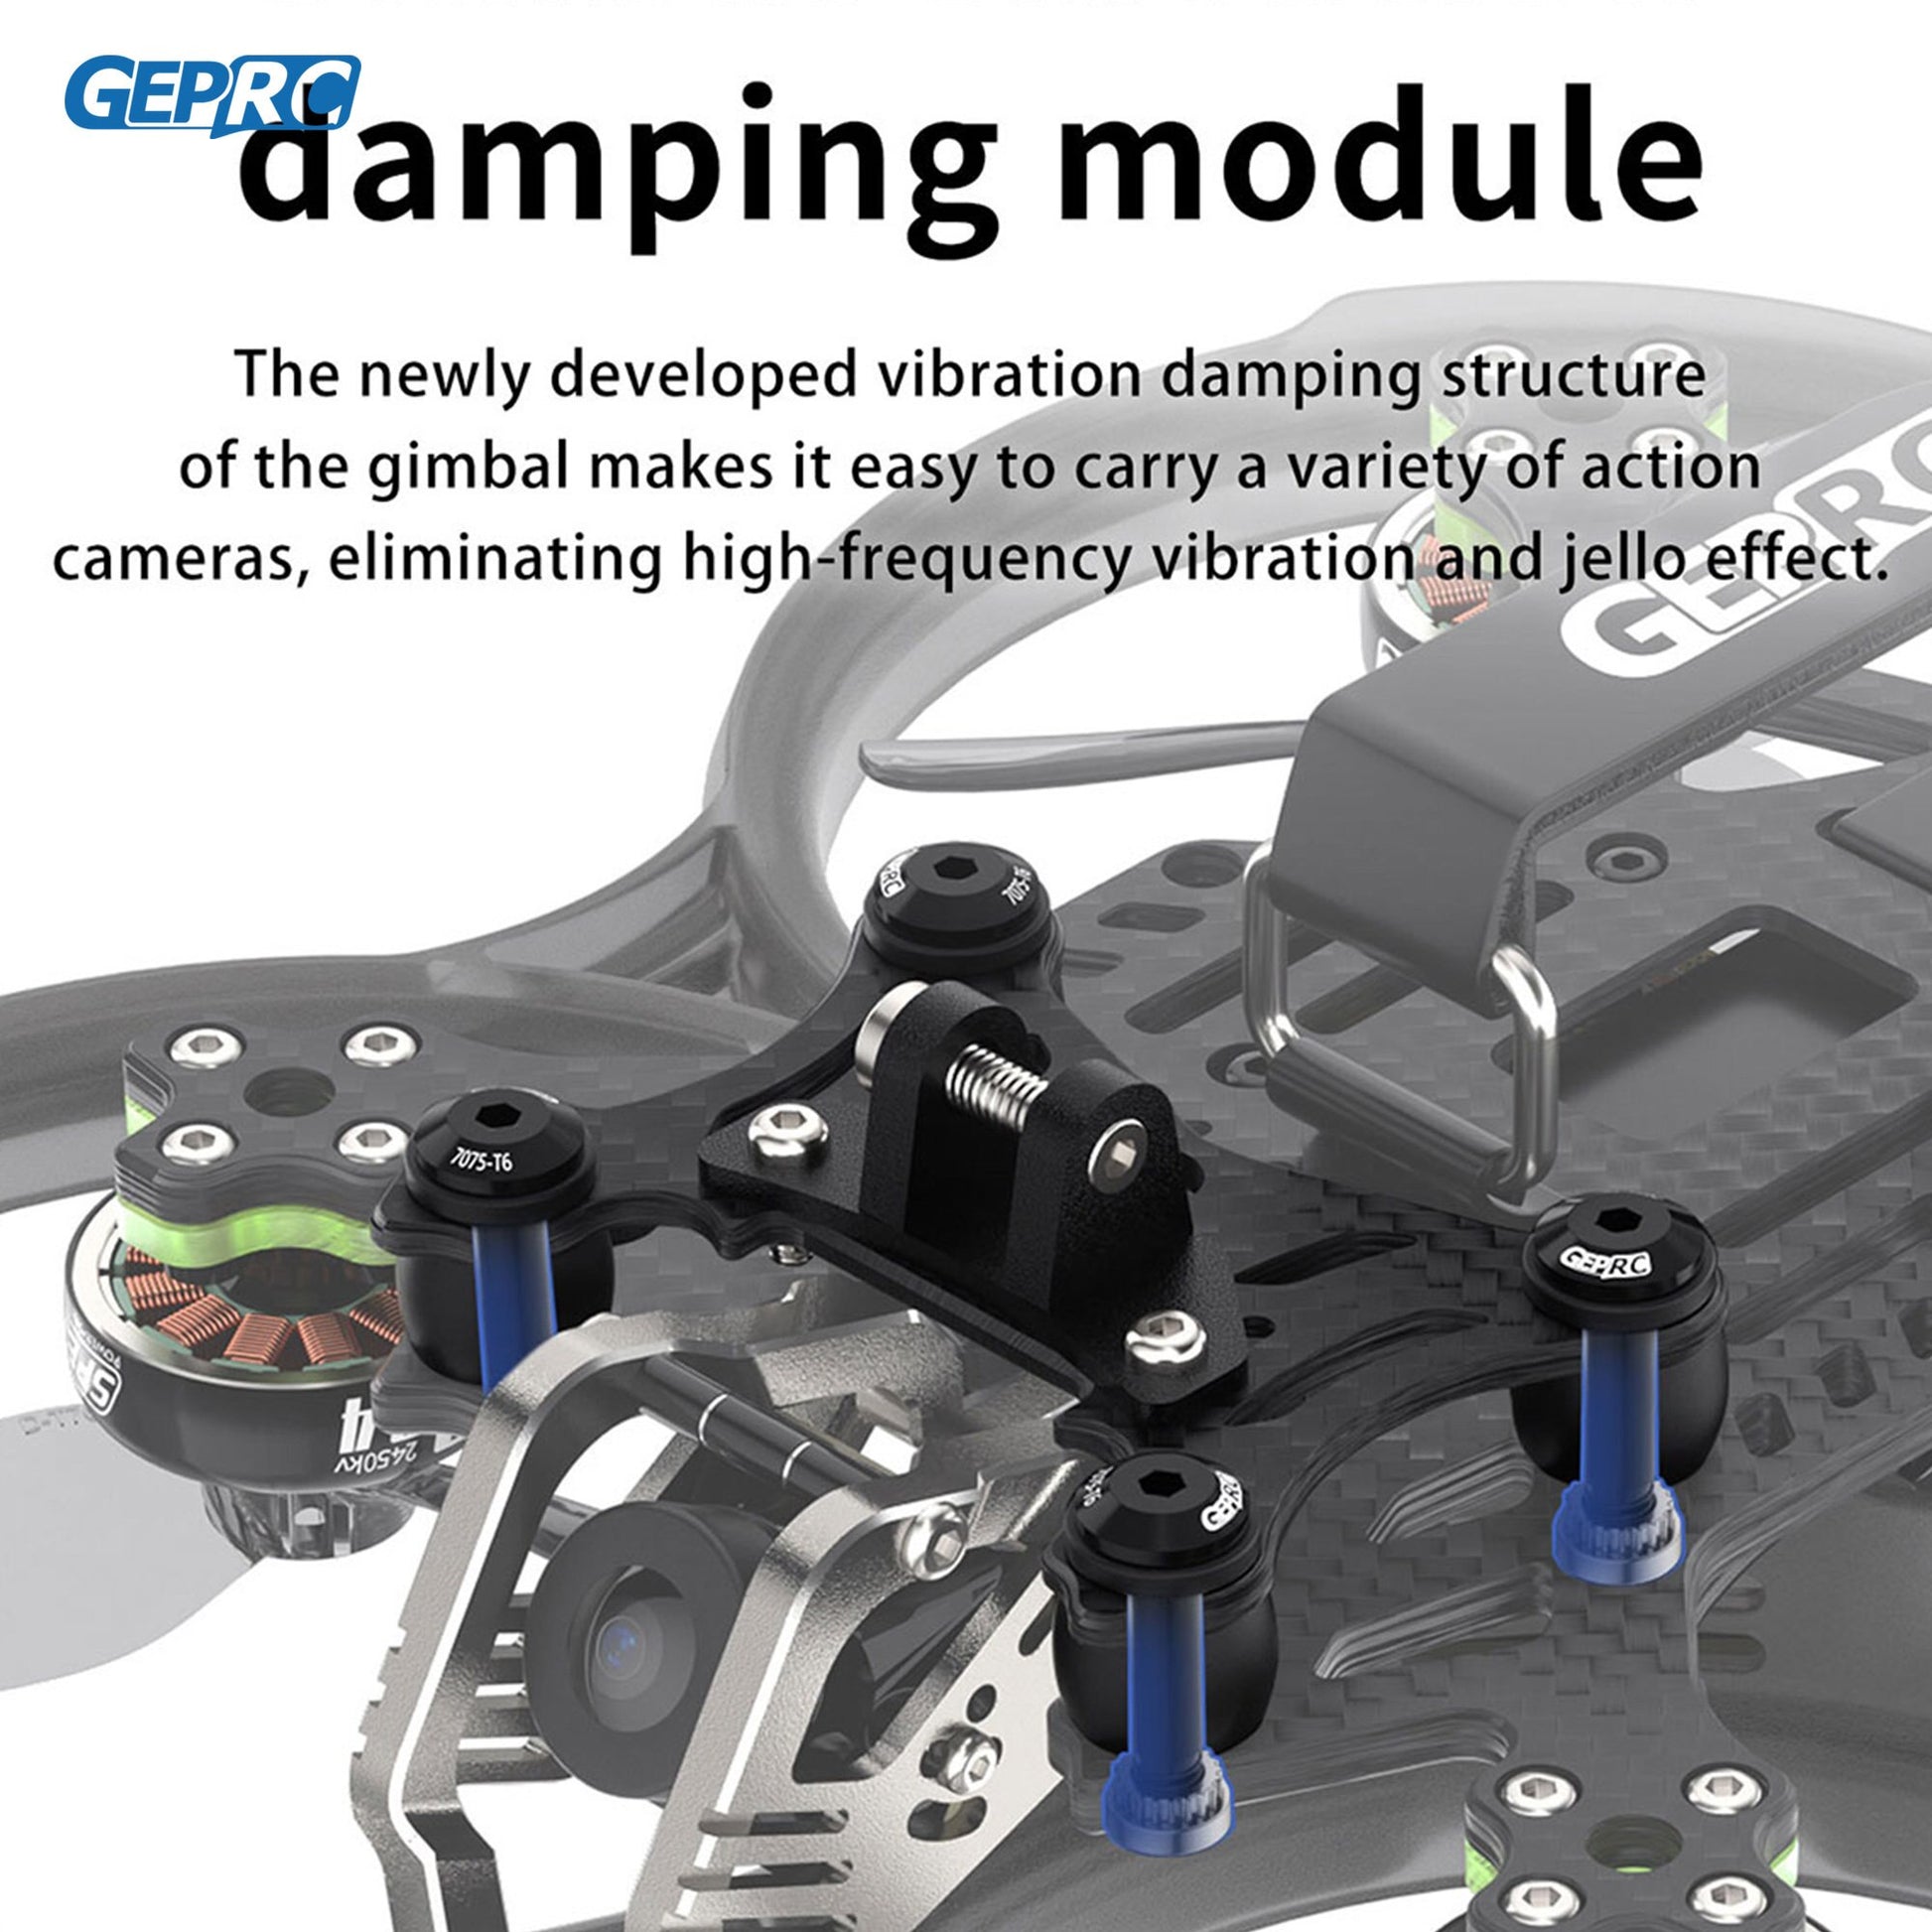 GEPRC Cinebot30 HD, gimbal's vibration damping structure makes it easy to carry a variety of